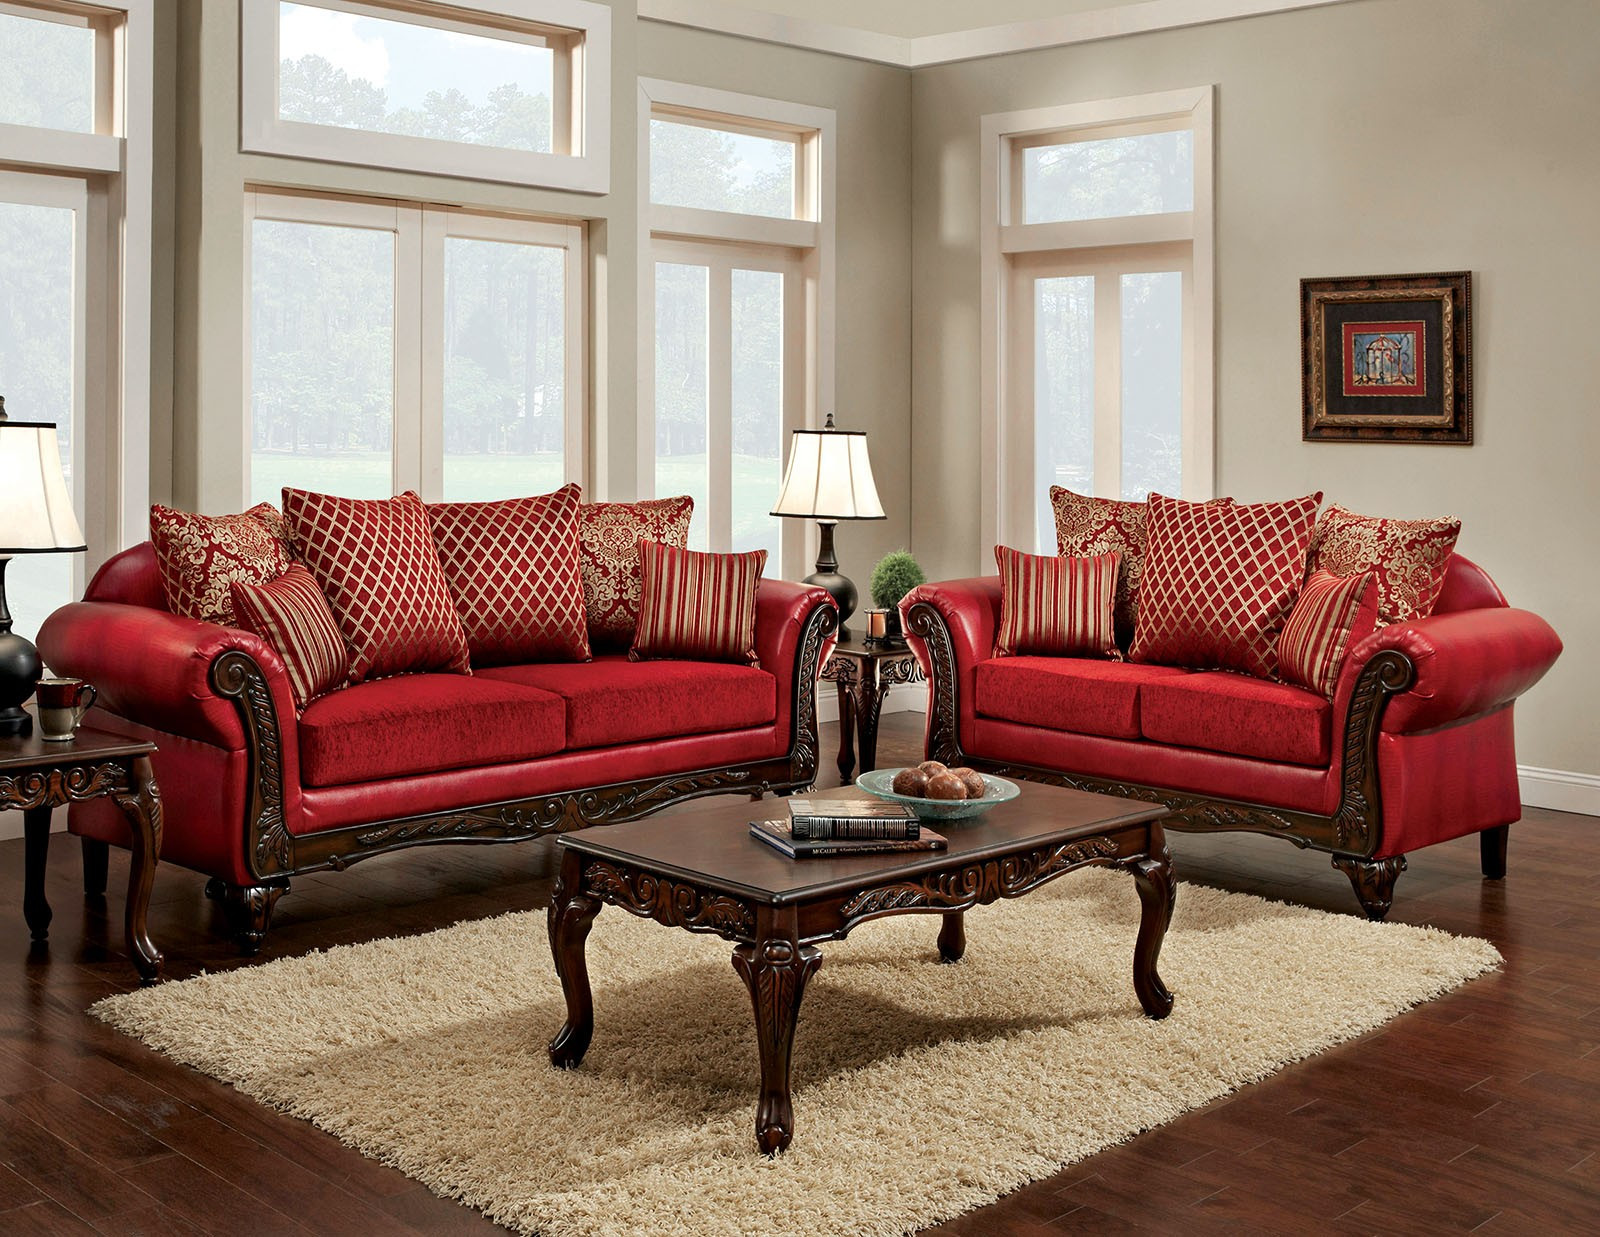 Red Living Room Chair
 Marcus Red Living Room Set SM7640 SF Furniture of America